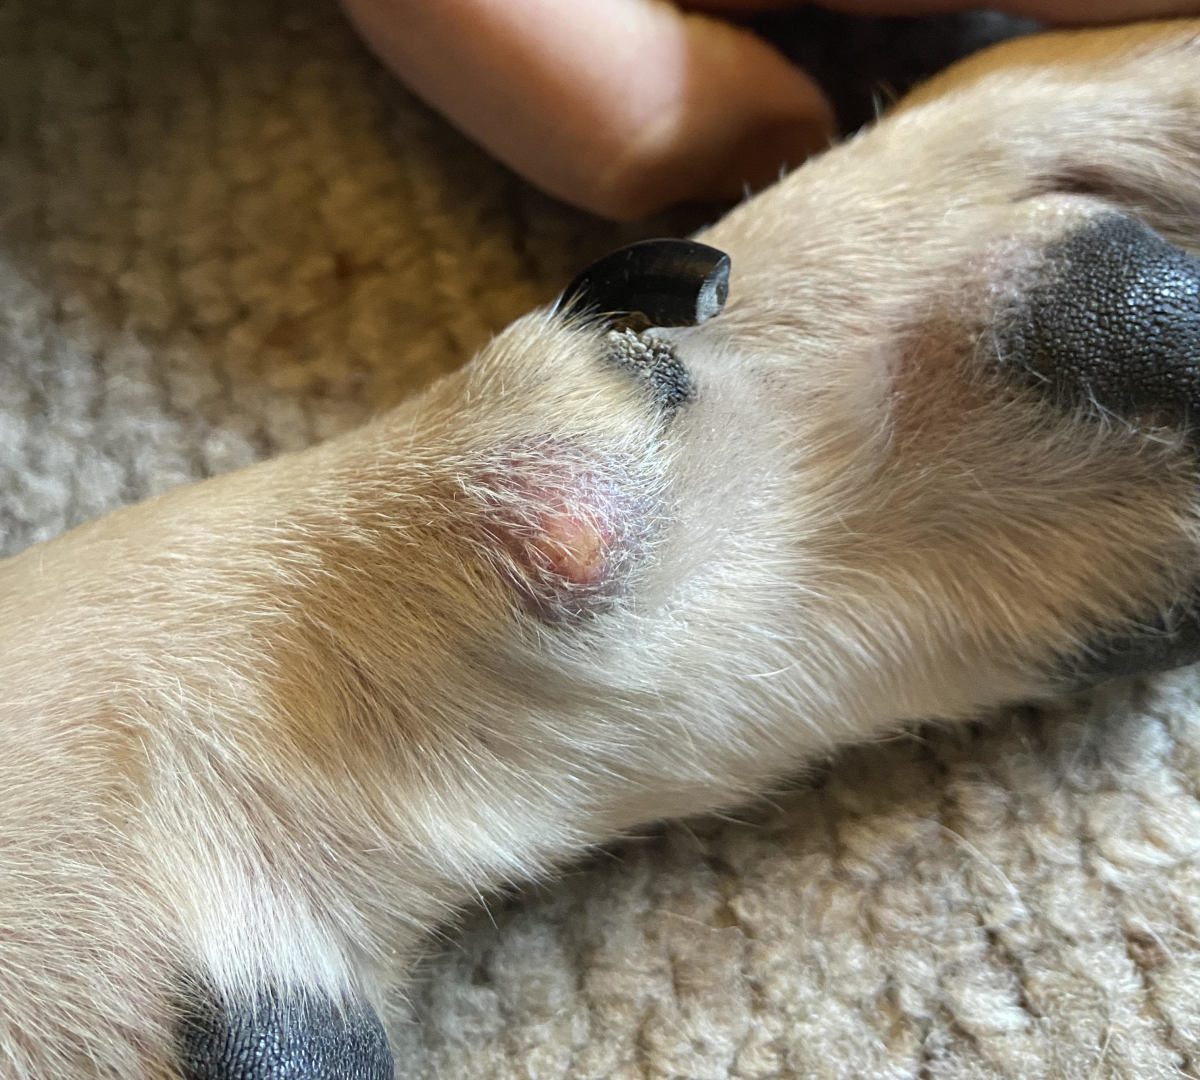 What's This Lump on My Dog's Paw?